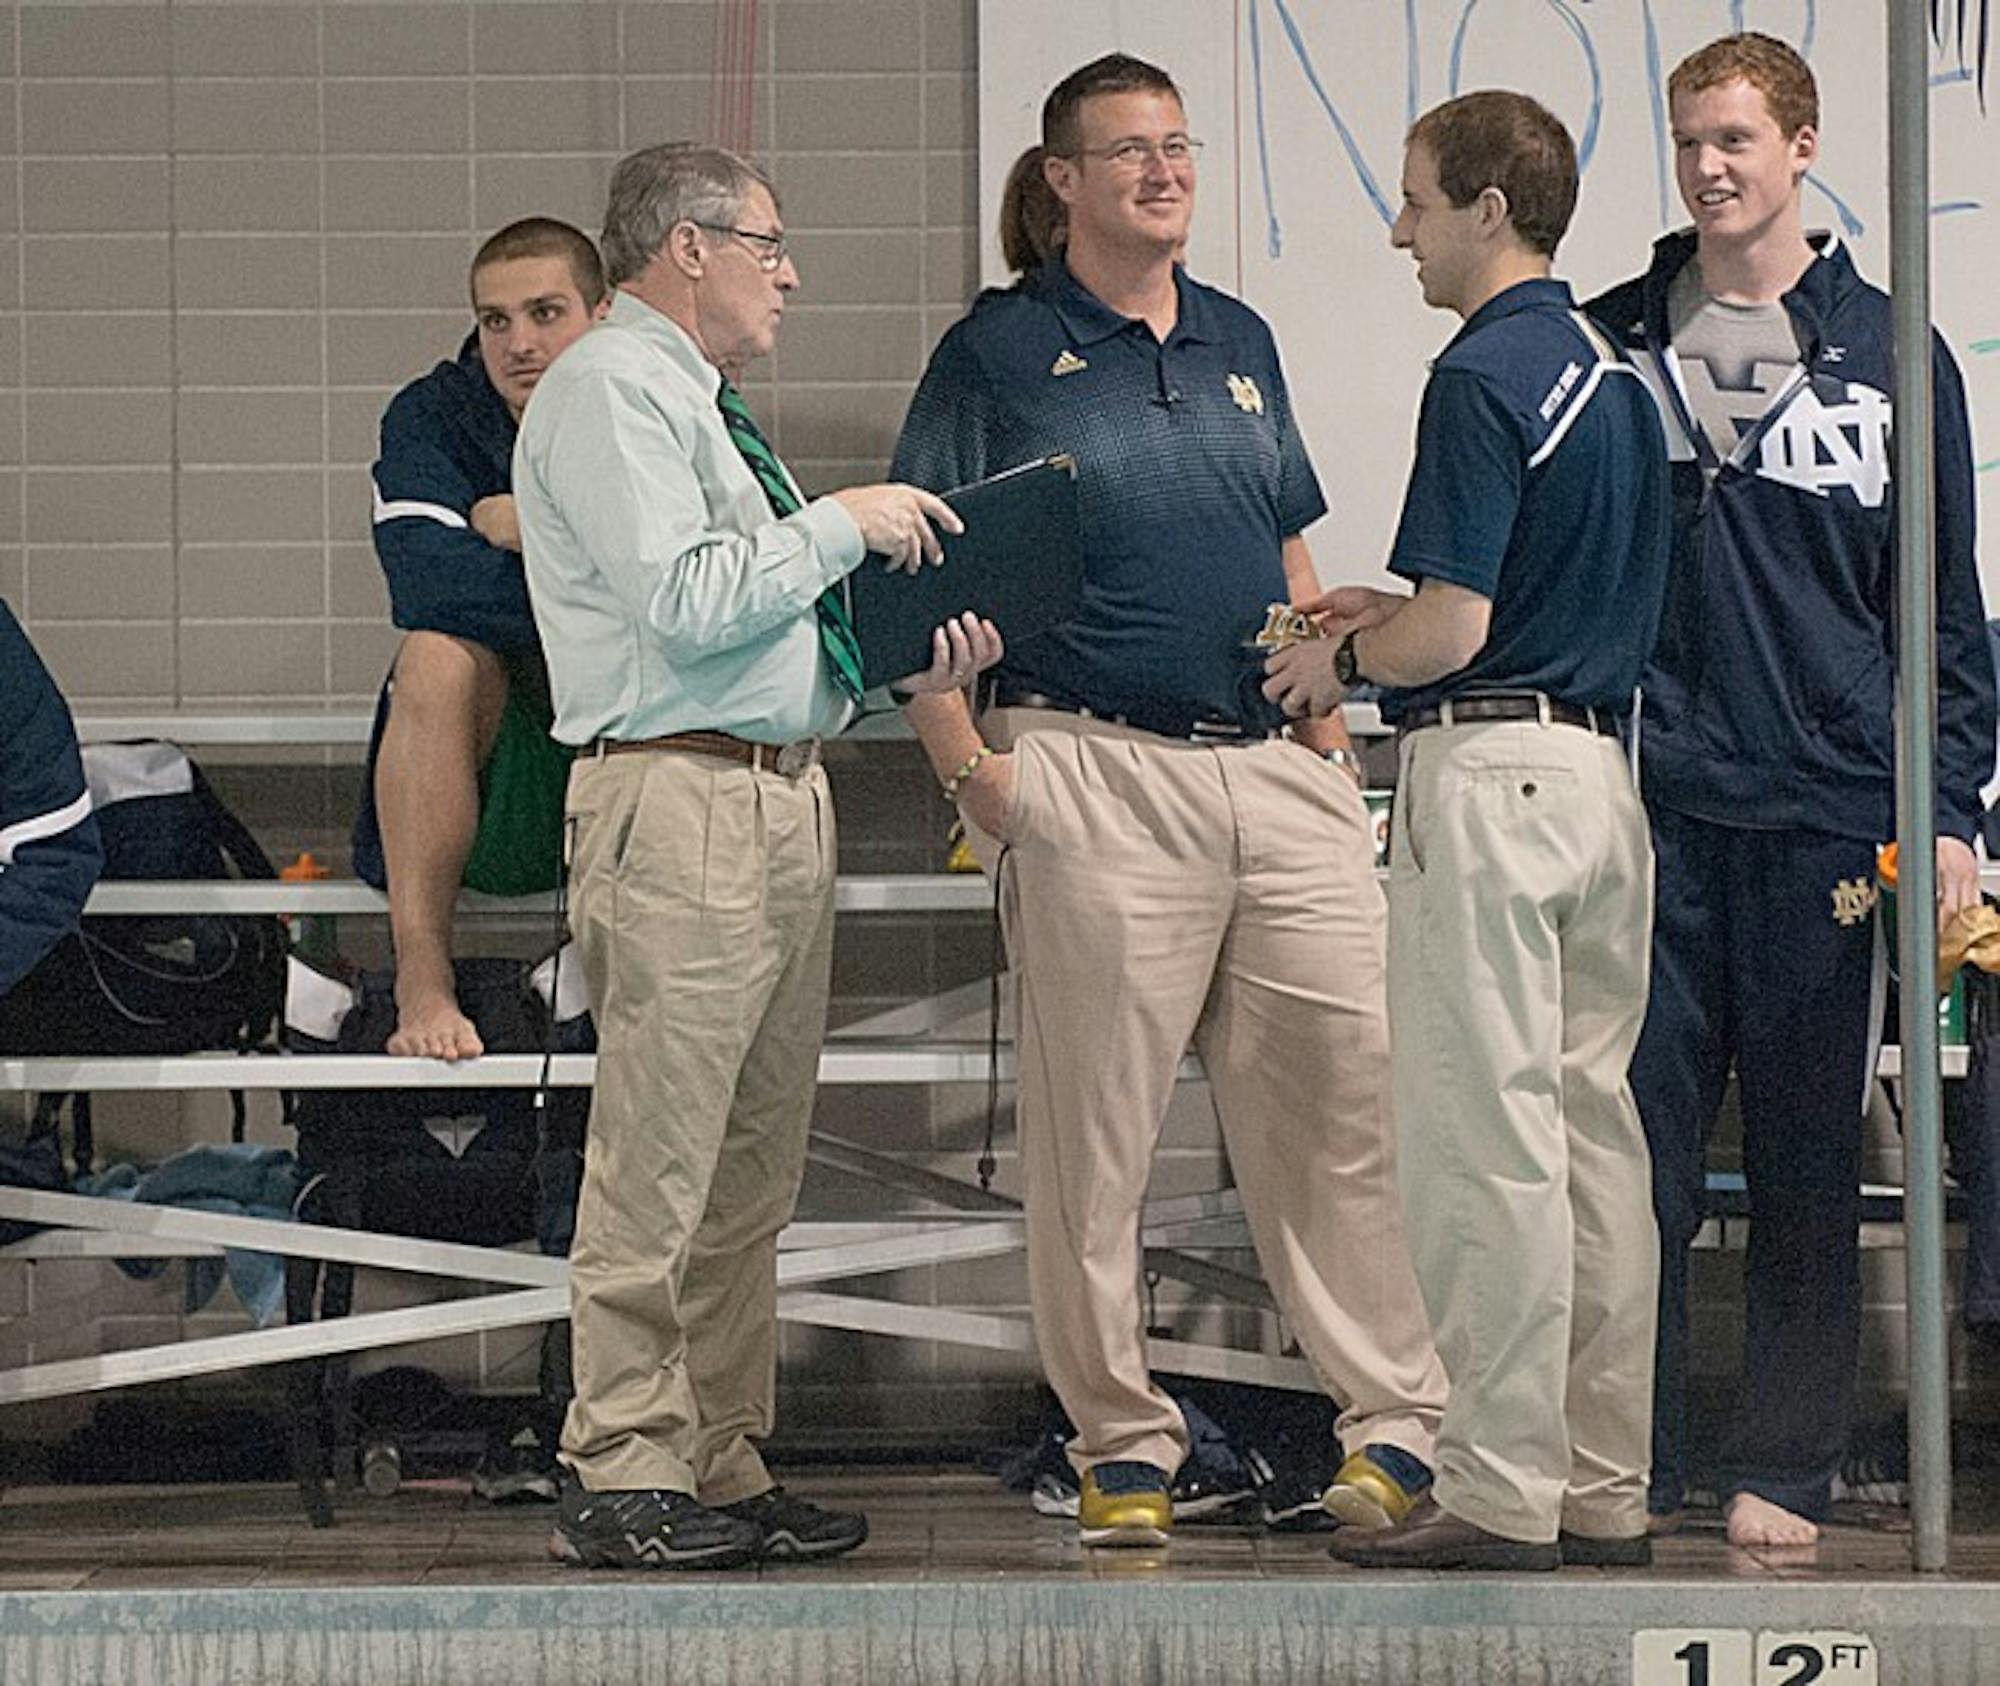 Irish coach Tim Welsh, far left, talks over his team’s win Saturday against Cleveland State, which was his last home meet as head coach.